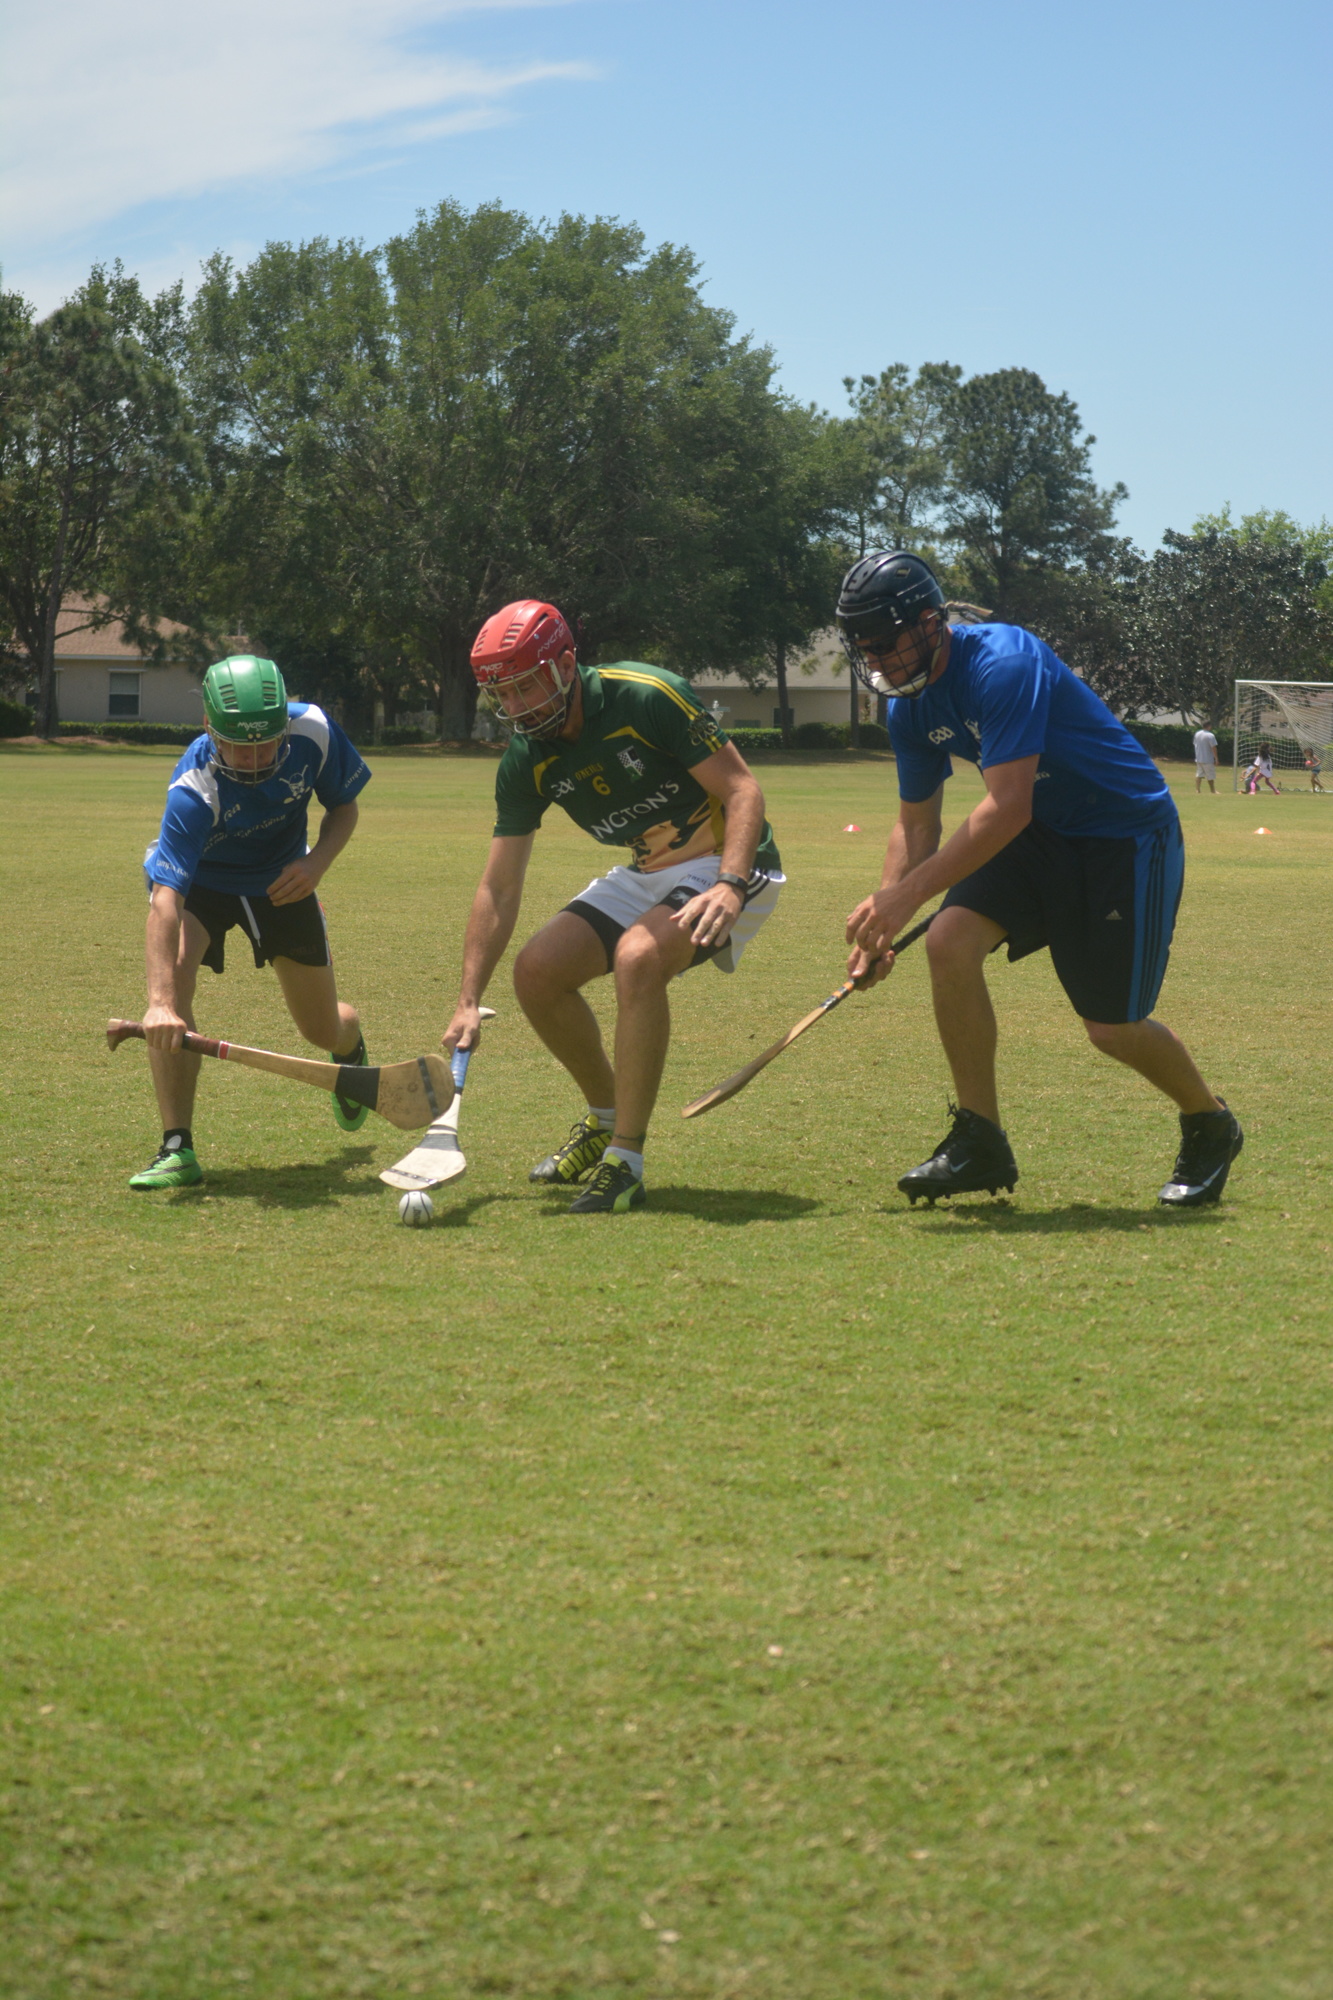 Tim Boyll, Austin Rushnell and Zack Mozina battle for a ground pass.